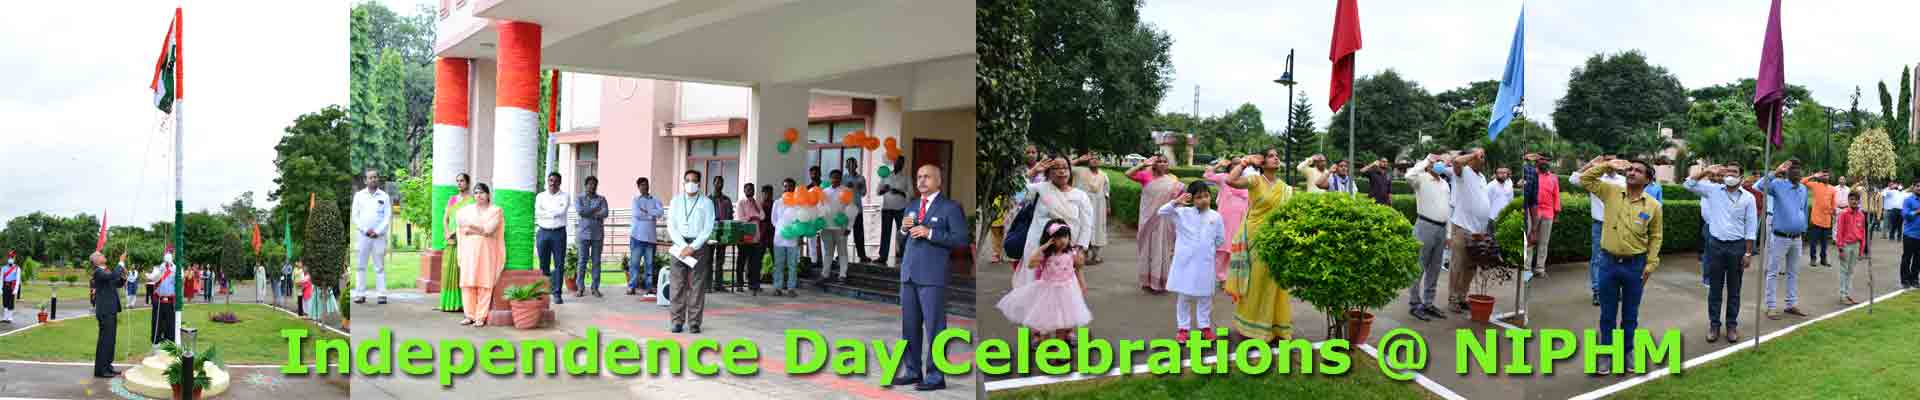 Independence Day Celebrations @ NIPHM